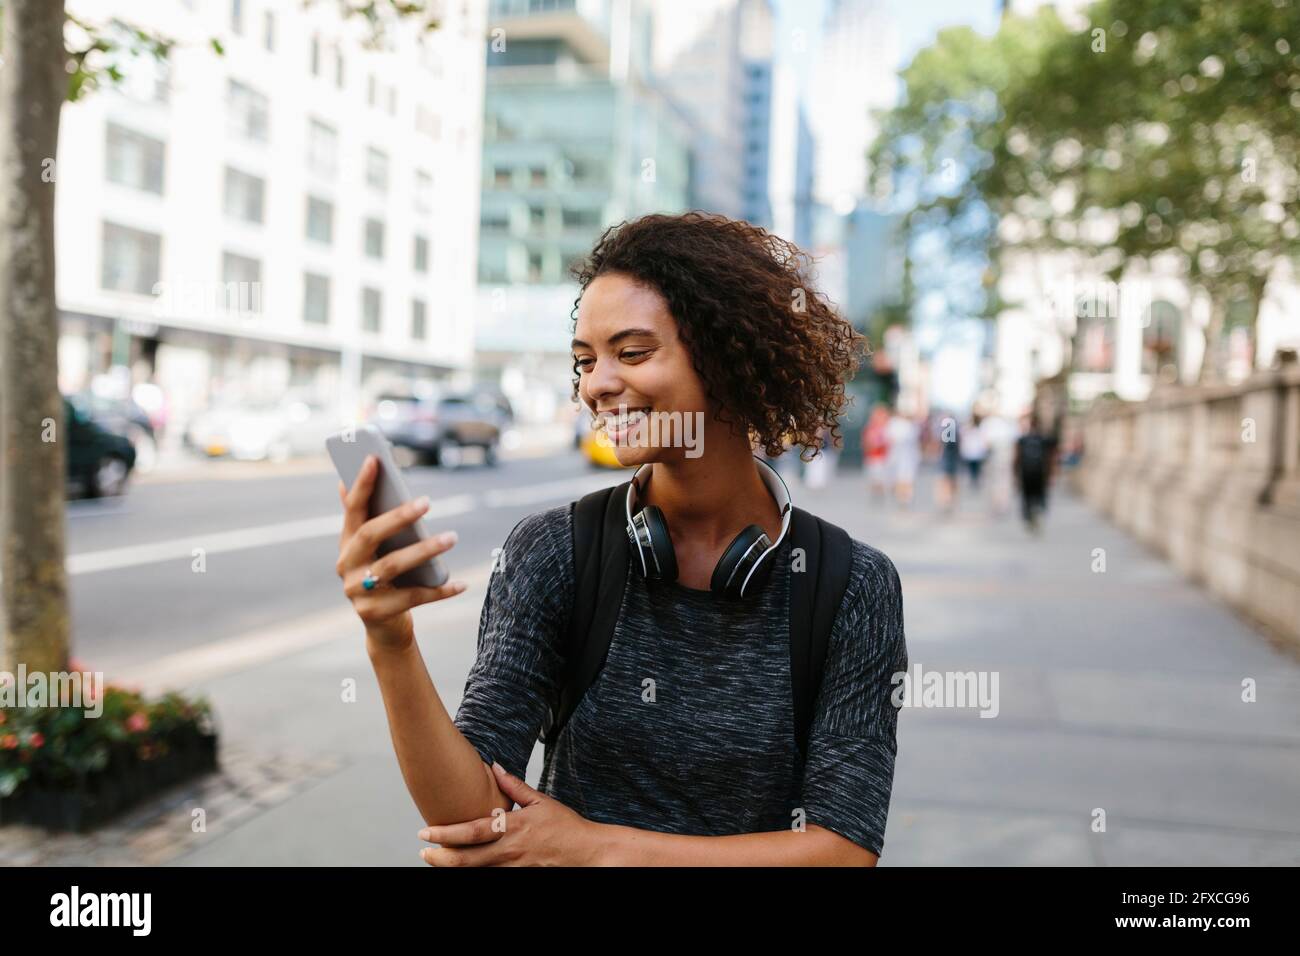 Smiling young woman looking at mobile phone in city Stock Photo